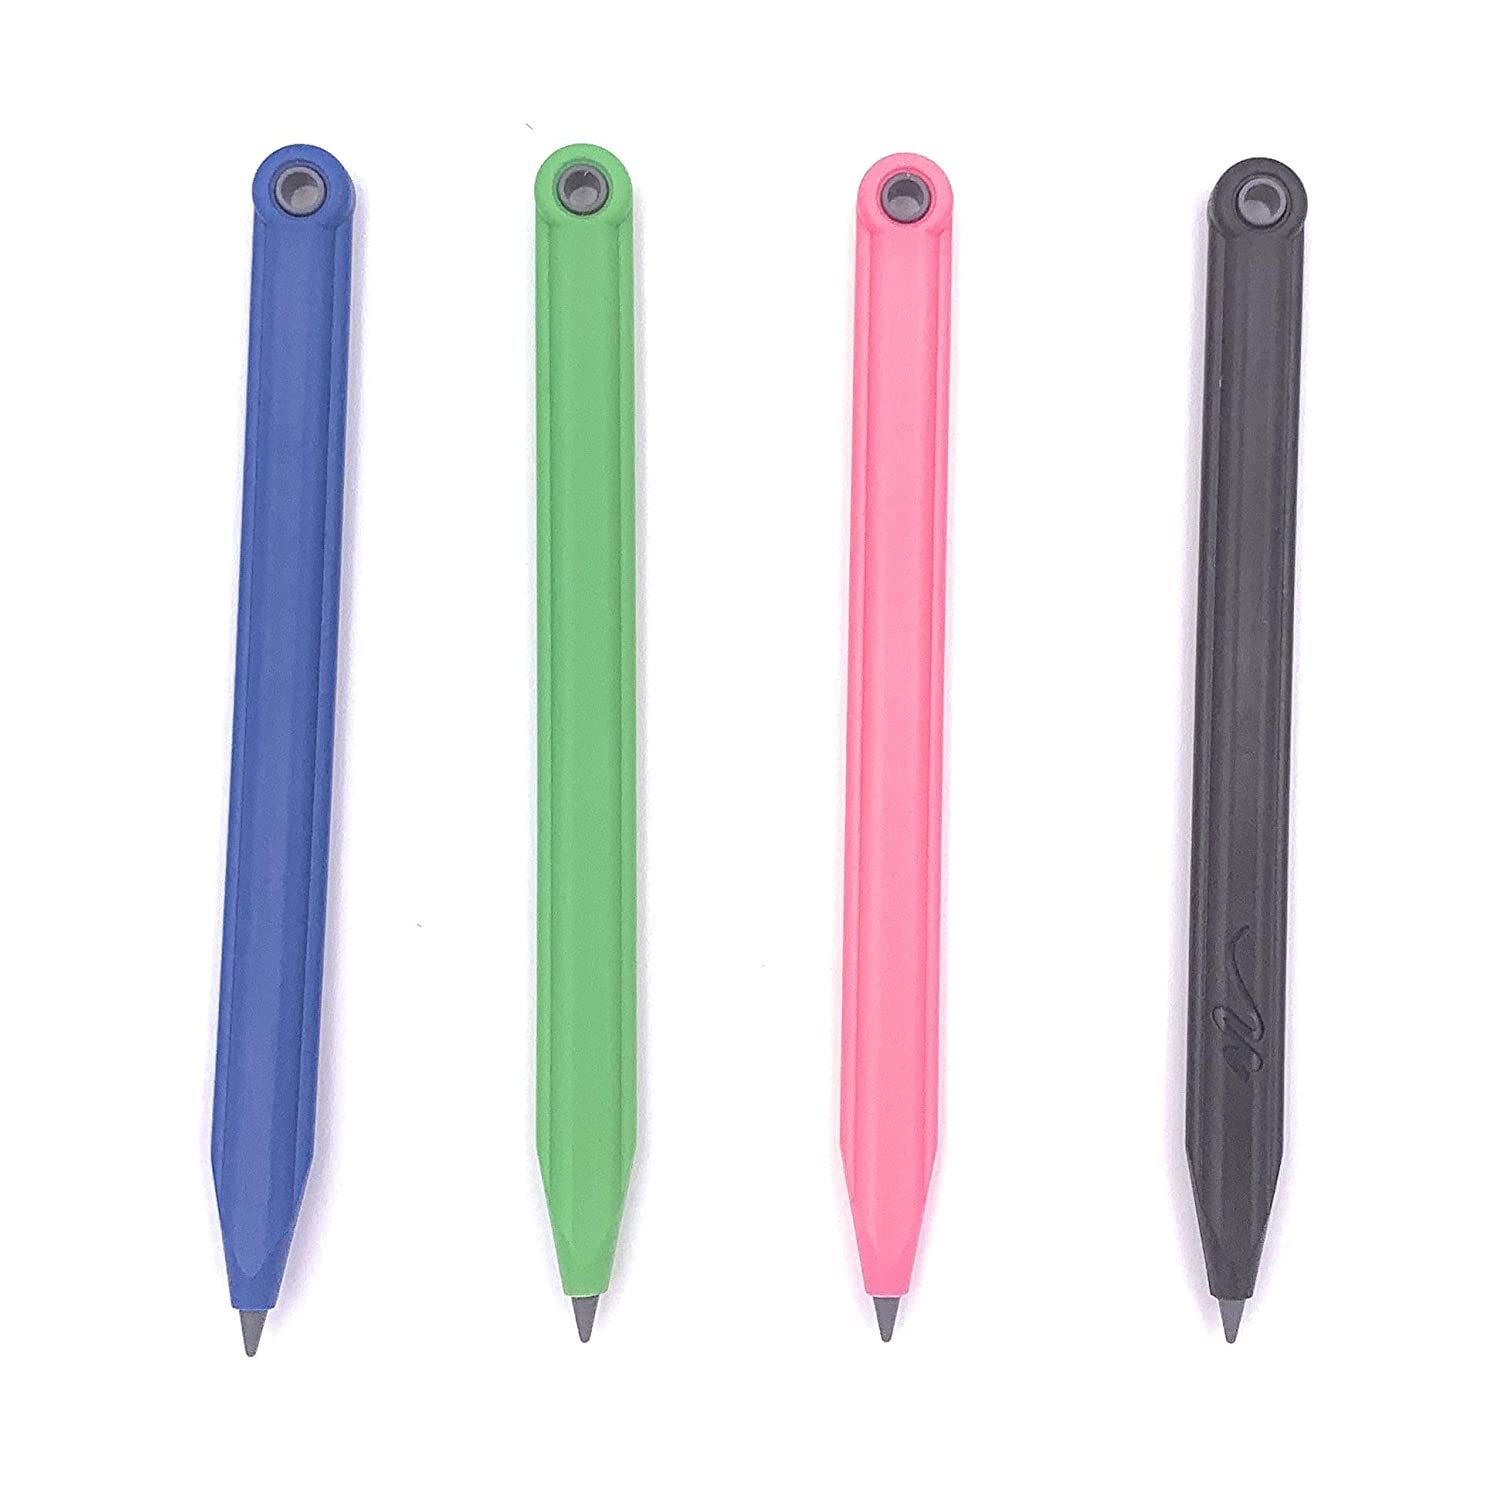 replacement stylus for boogie board lcd writing tablet (4 pack)